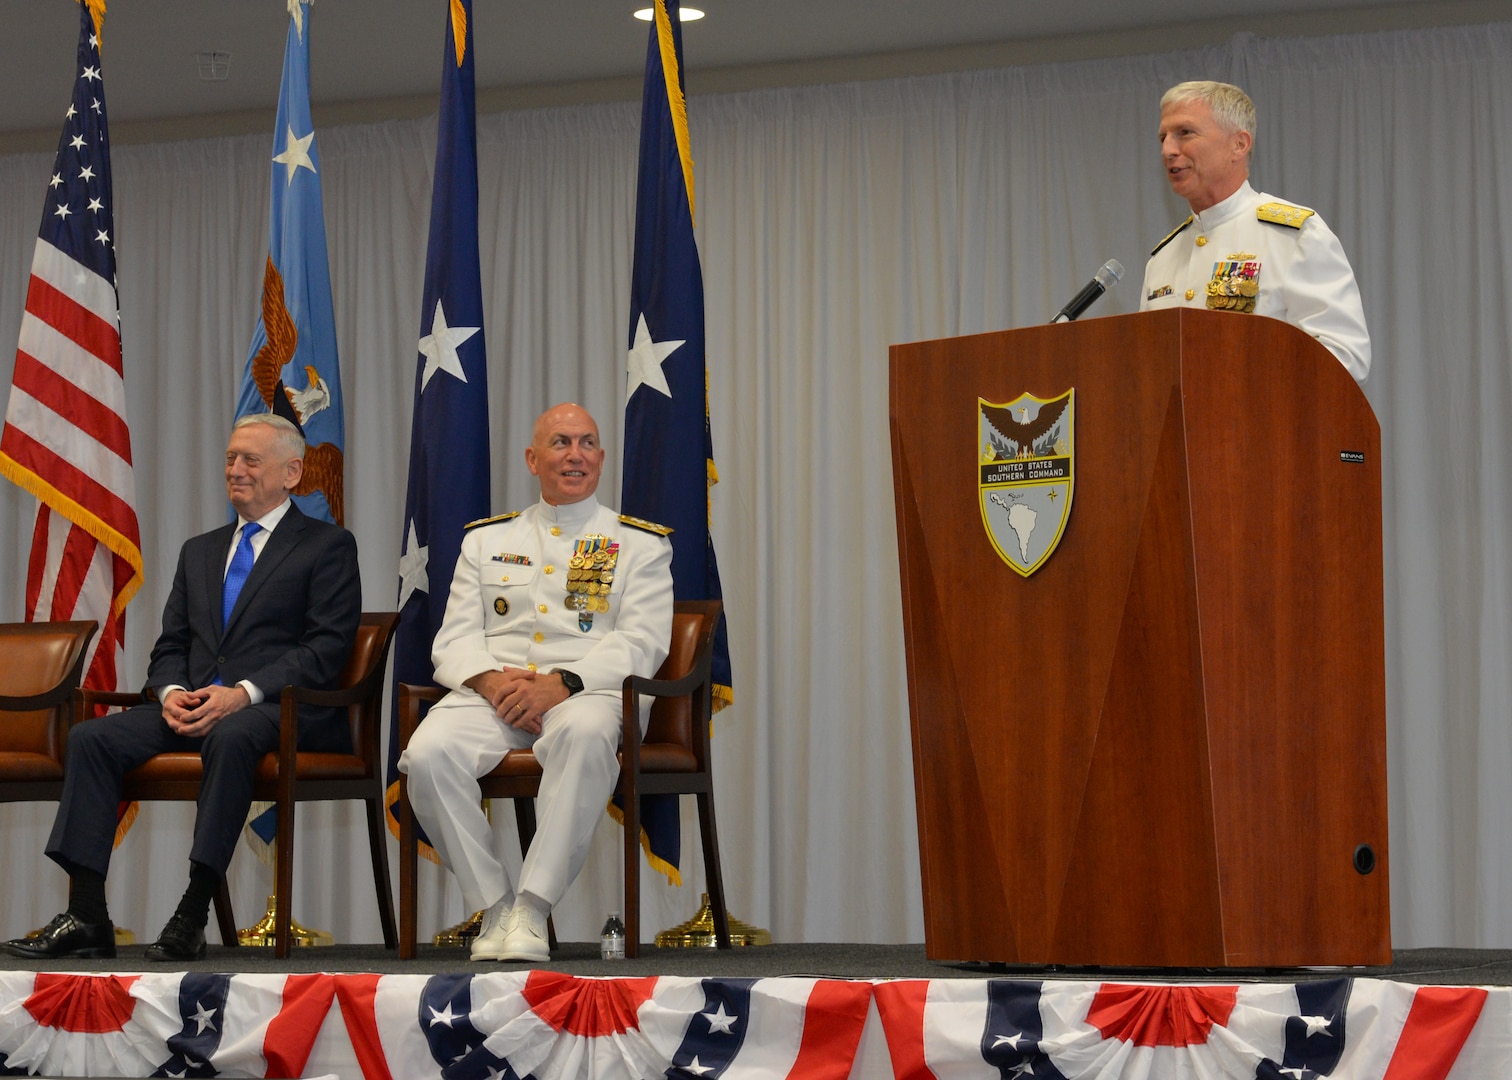 Adm. Craig S. Faller, USN, right, incoming commander of U.S. Southern Command, addresses the audience during the change of command ceremony change of command ceremony held at SOUTHCOM's headquarters in Miami, Fla.